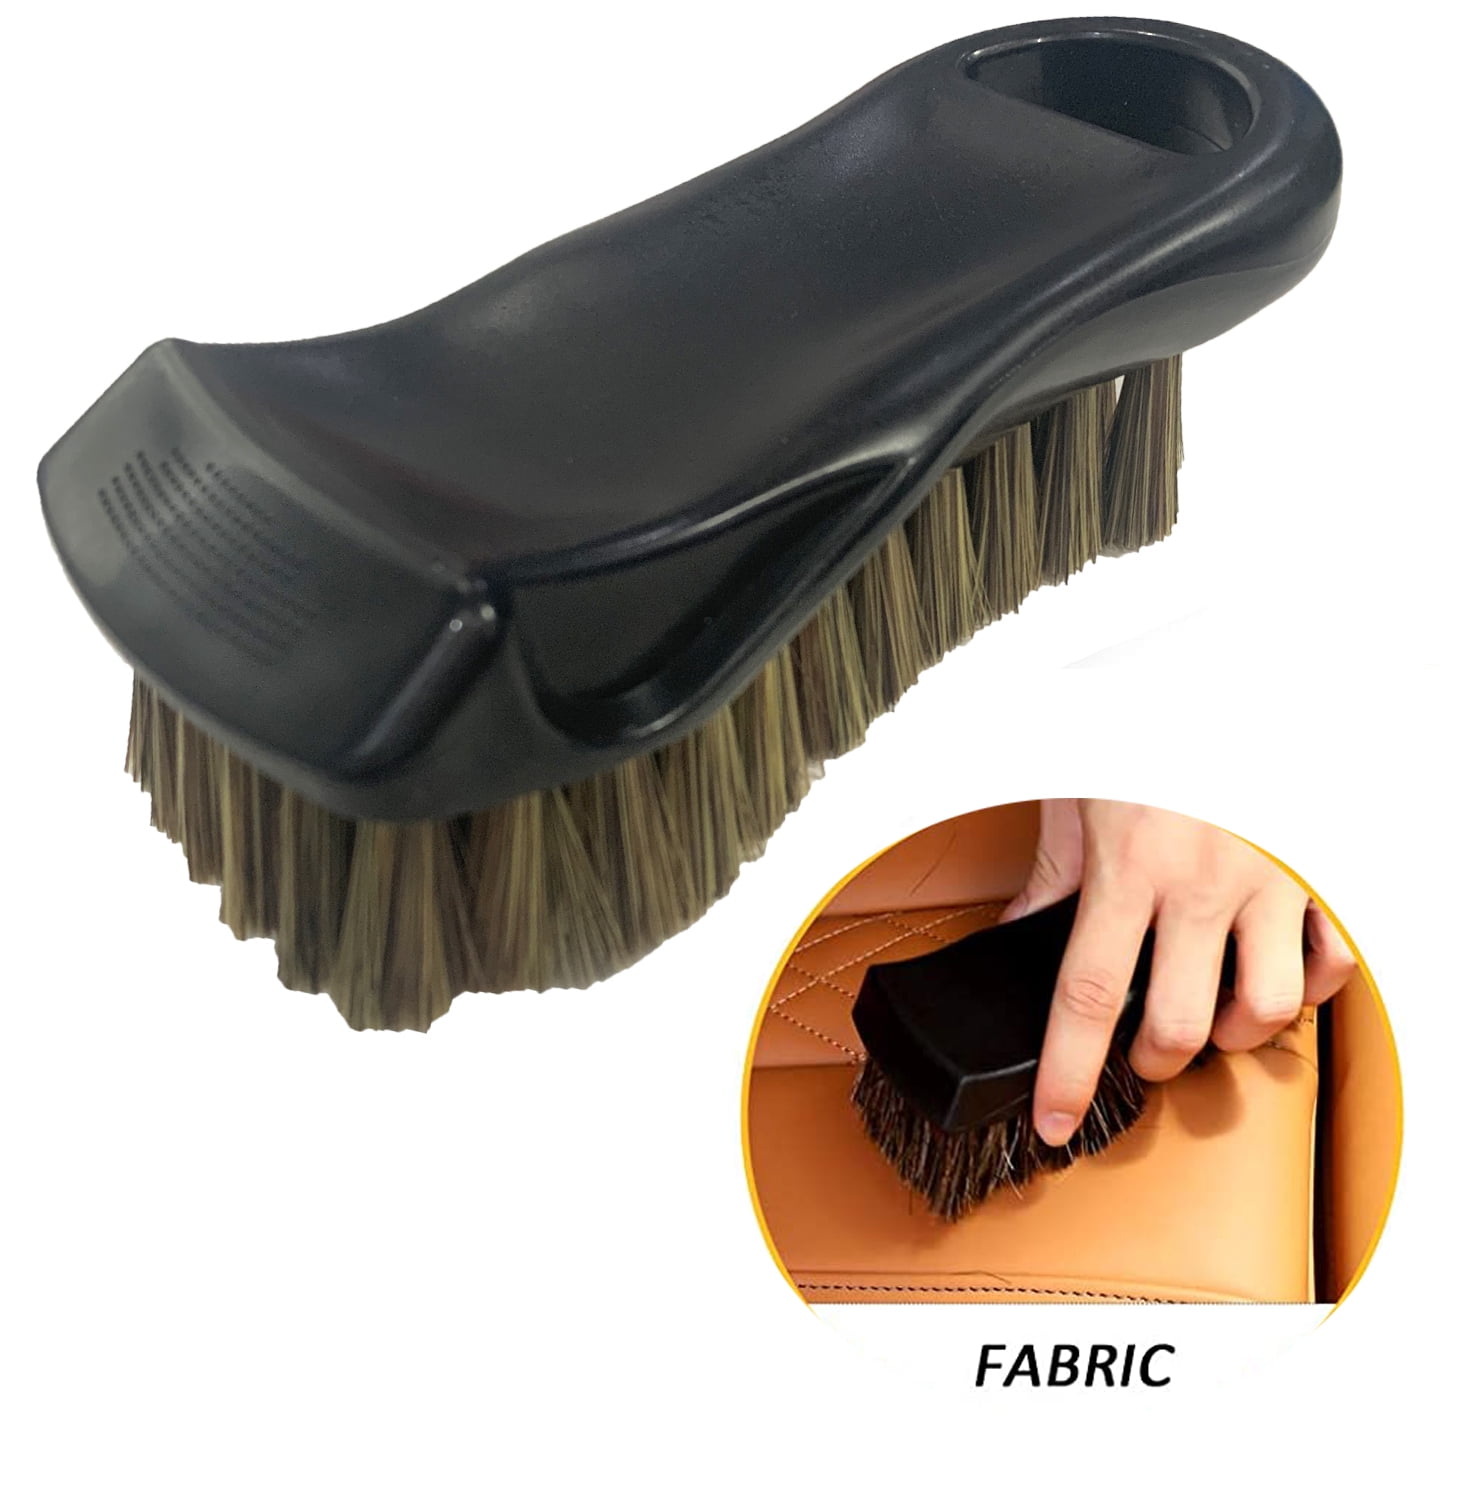 Auto Drive Brand 7380A 6 Inch Leather  Brush For Car Cleaning, Black